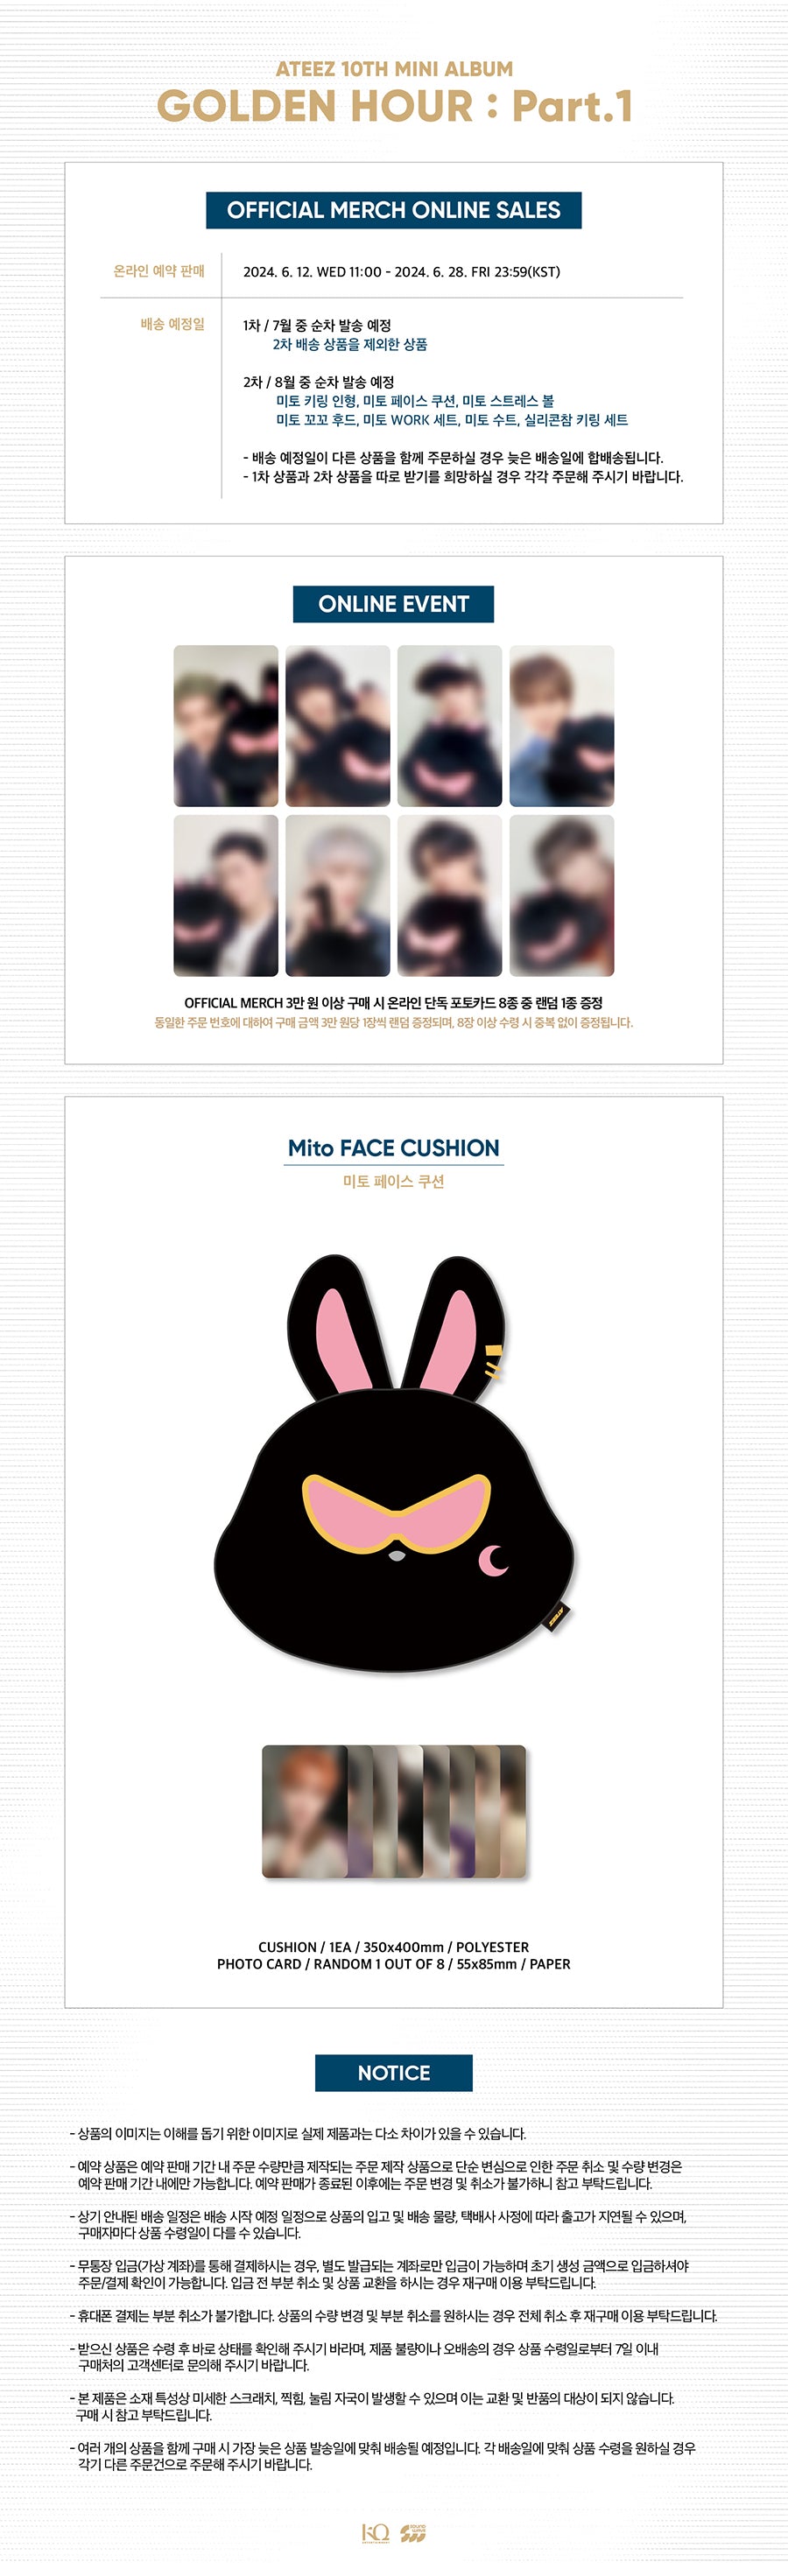 [PRE-ORDER] ATEEZ - Mito Face Cushion [GOLDEN HOUR : Part.1 Official MD]